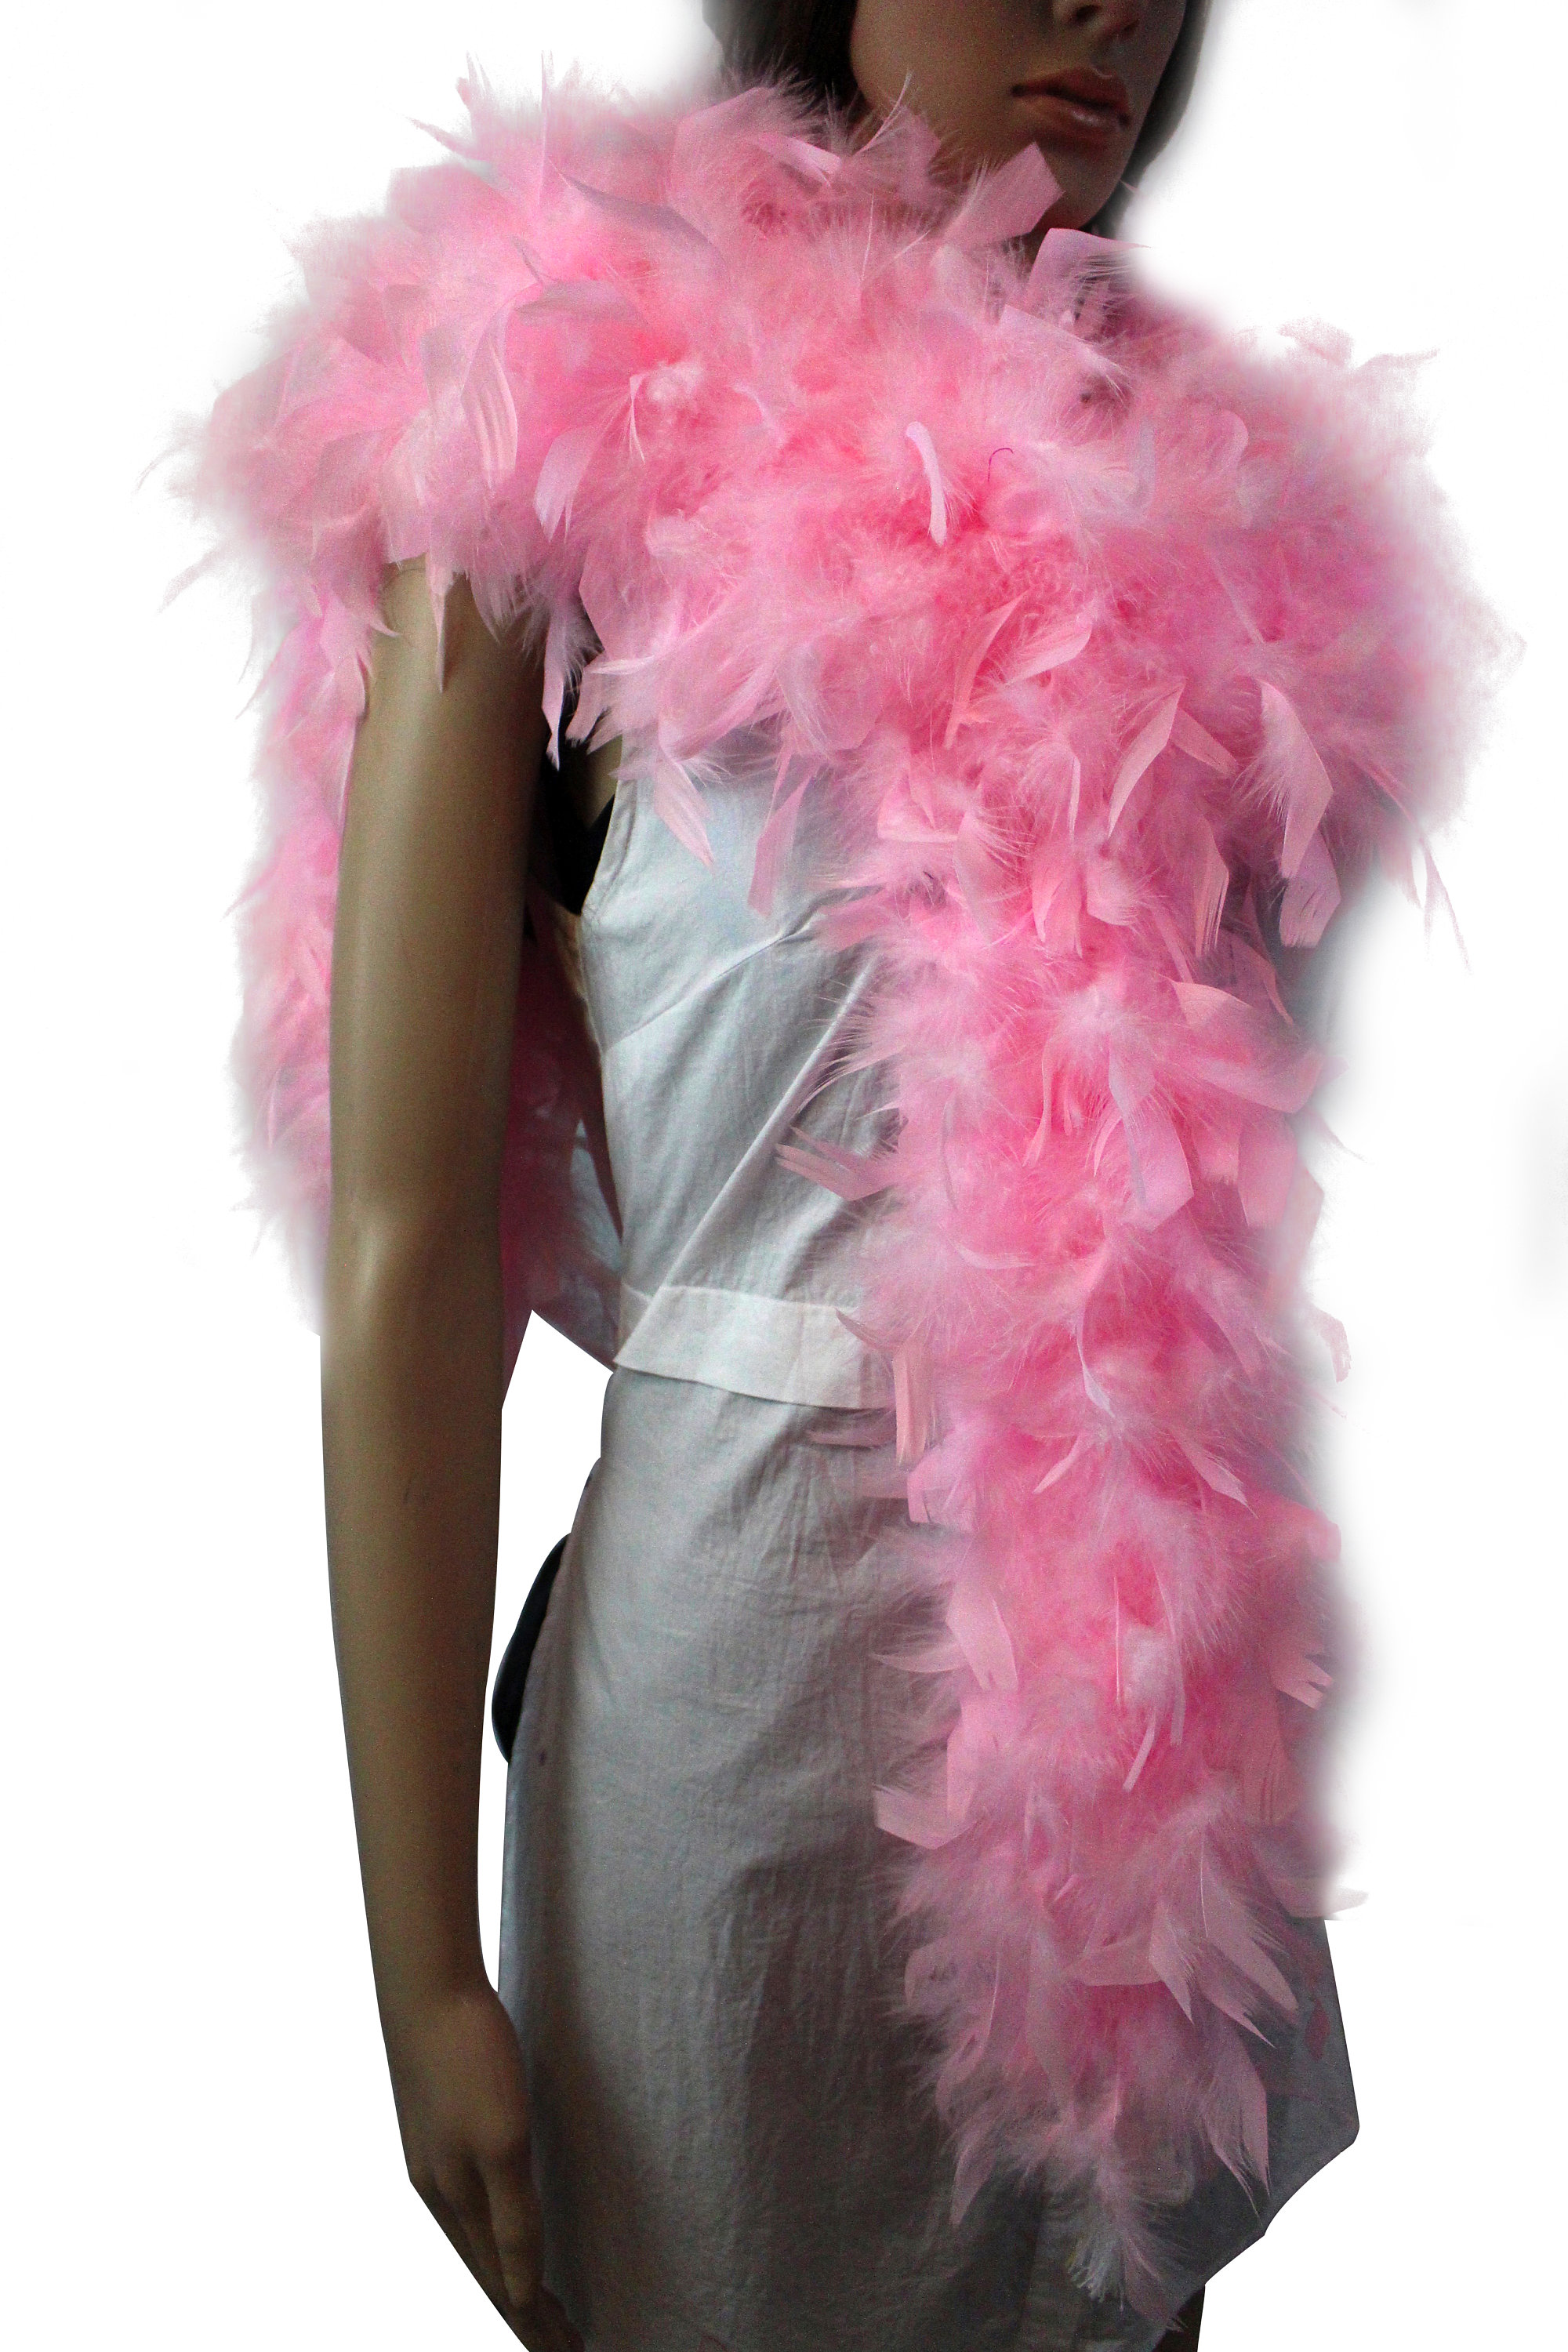 Light Pink Halloween Costume Christmas Tree and Home Decoration Wedding Larryhot Chandelle Pink Feather Boa 2Yards 75g Colorfu 20 LED Lights Boas for Party 